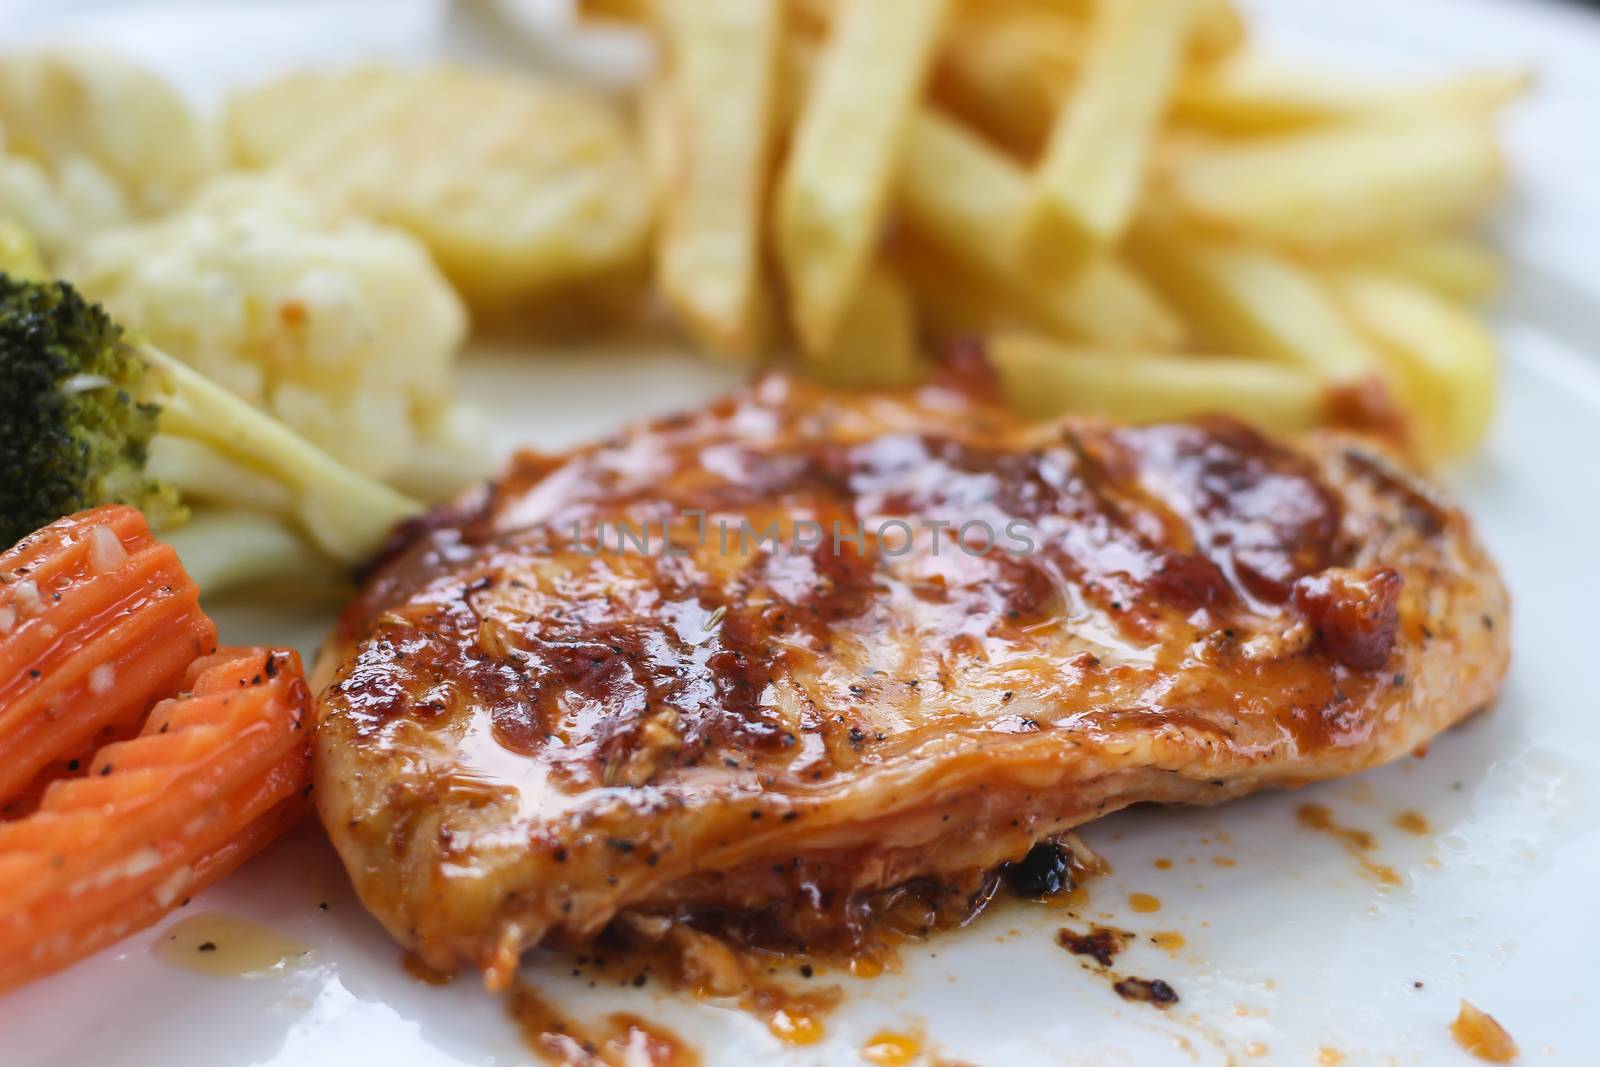 Chicken steak served with french fries and salads to vegetables